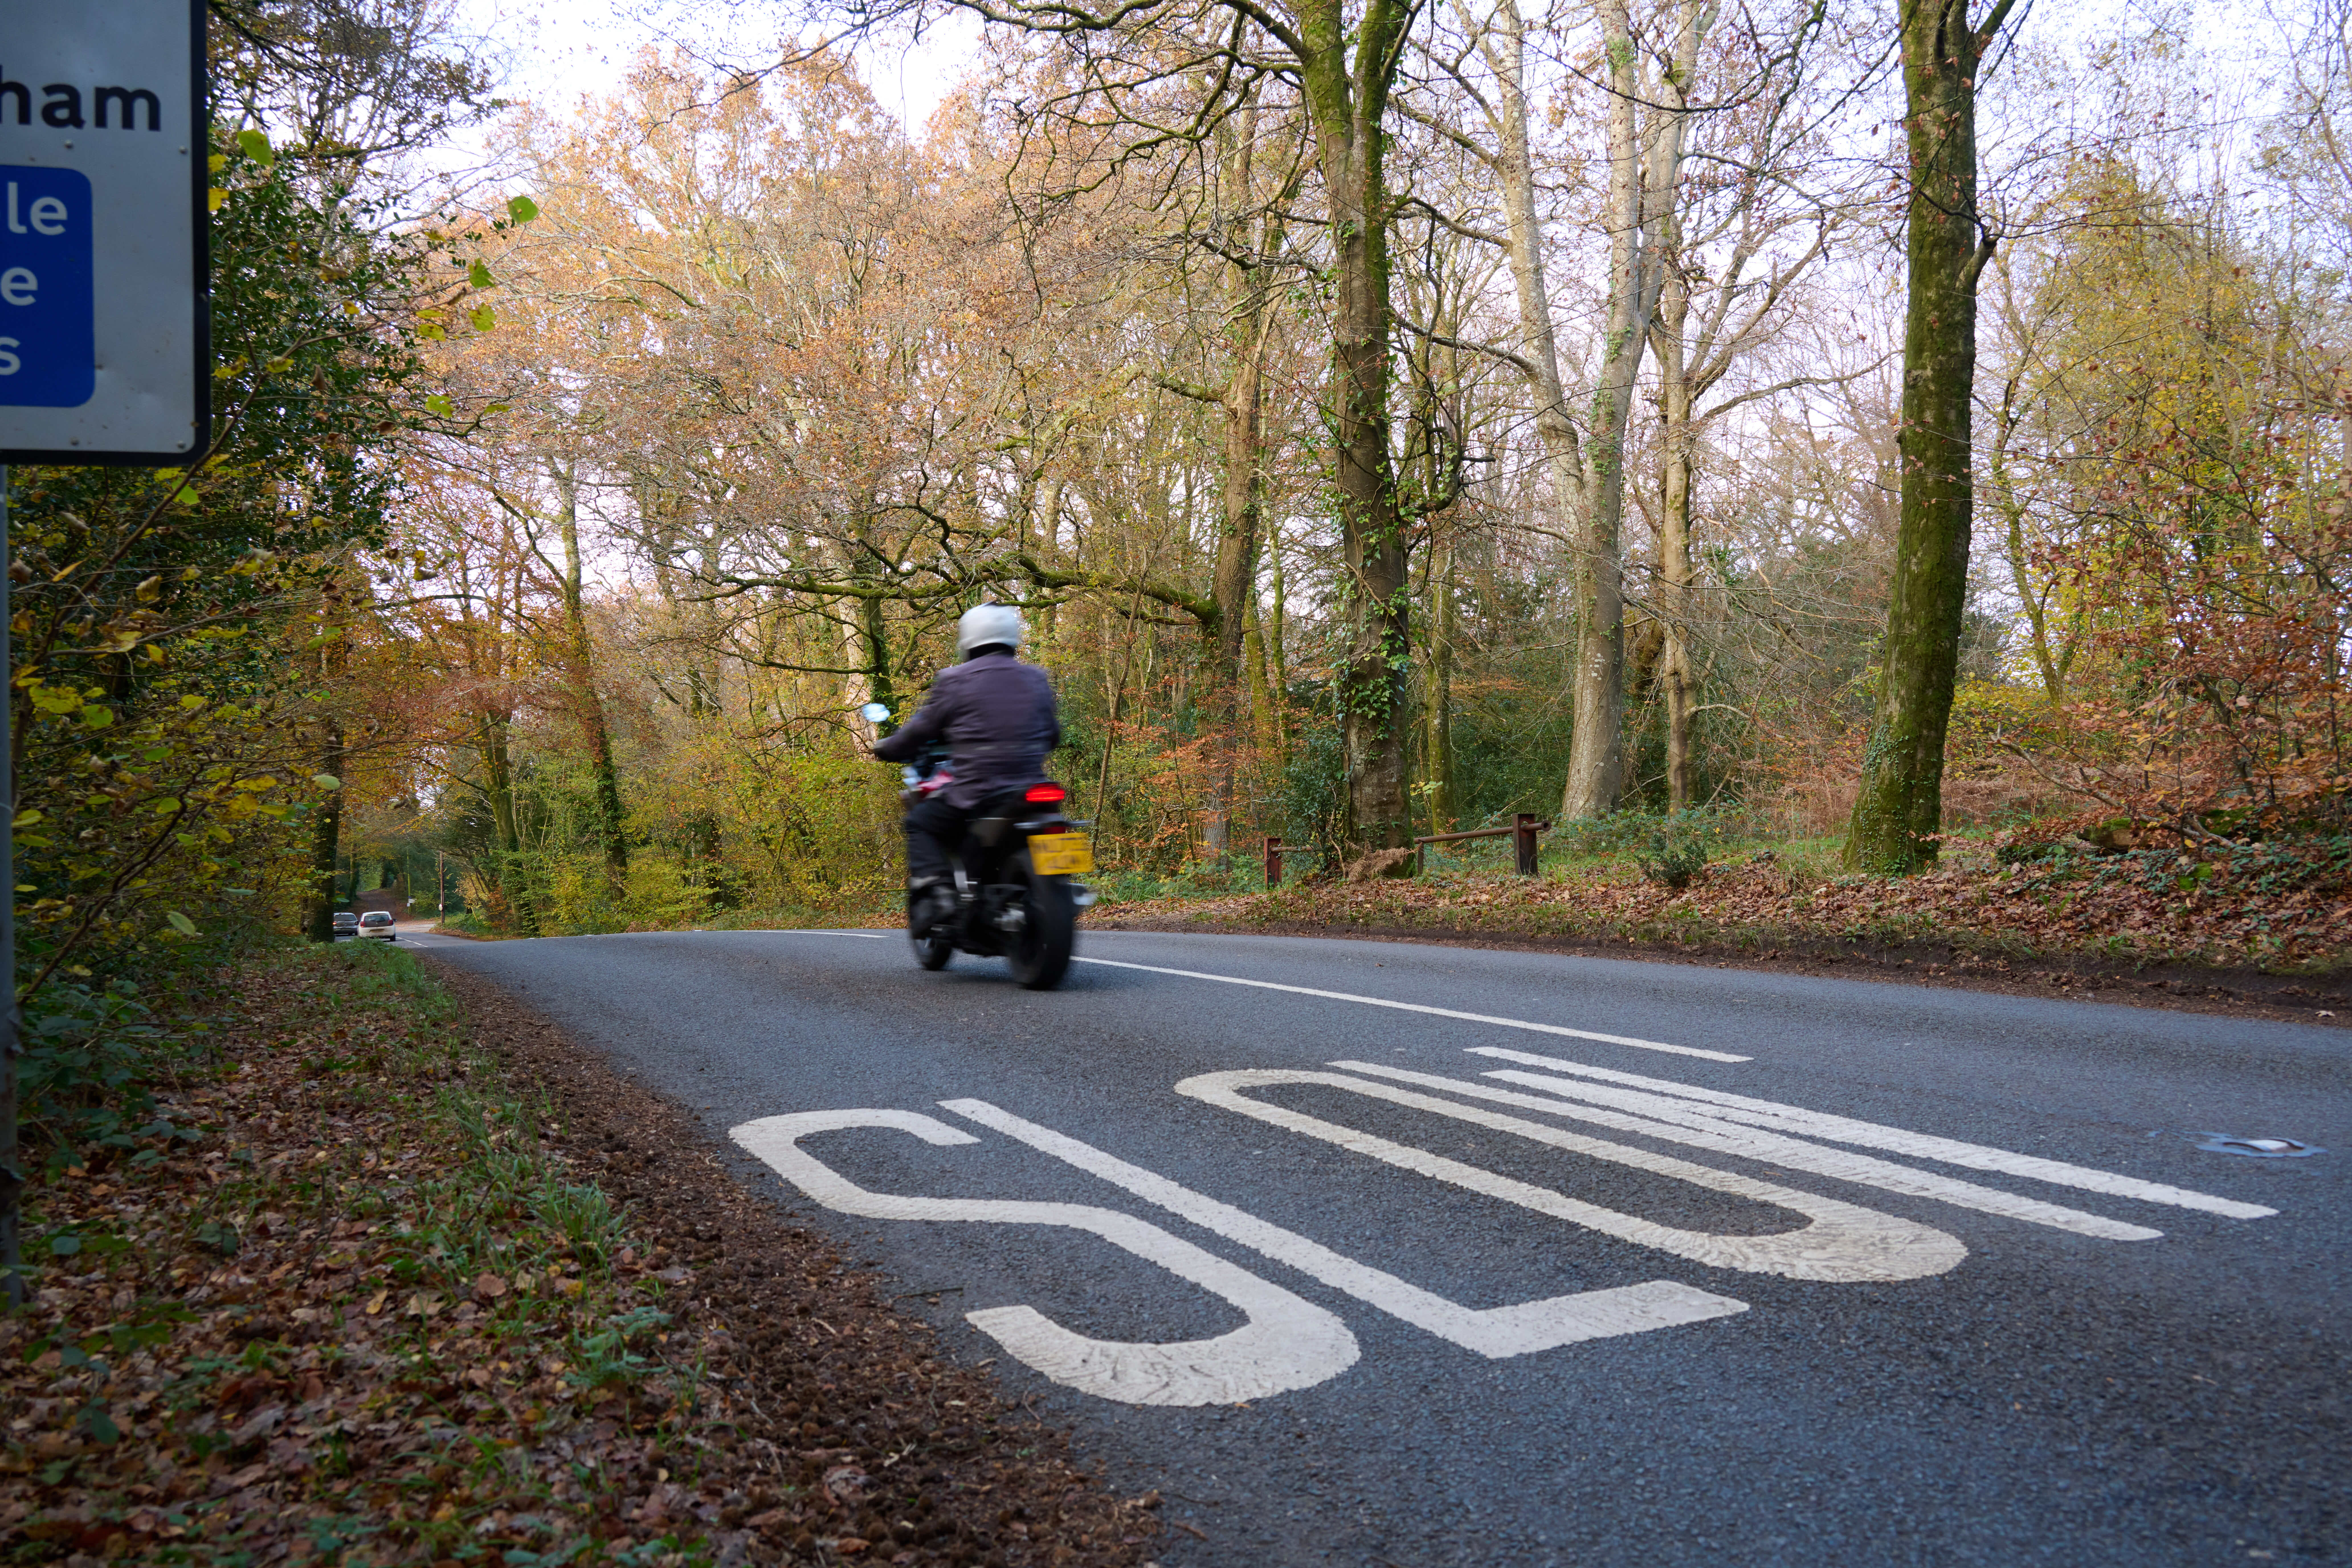 Motorbike on road with slow sign